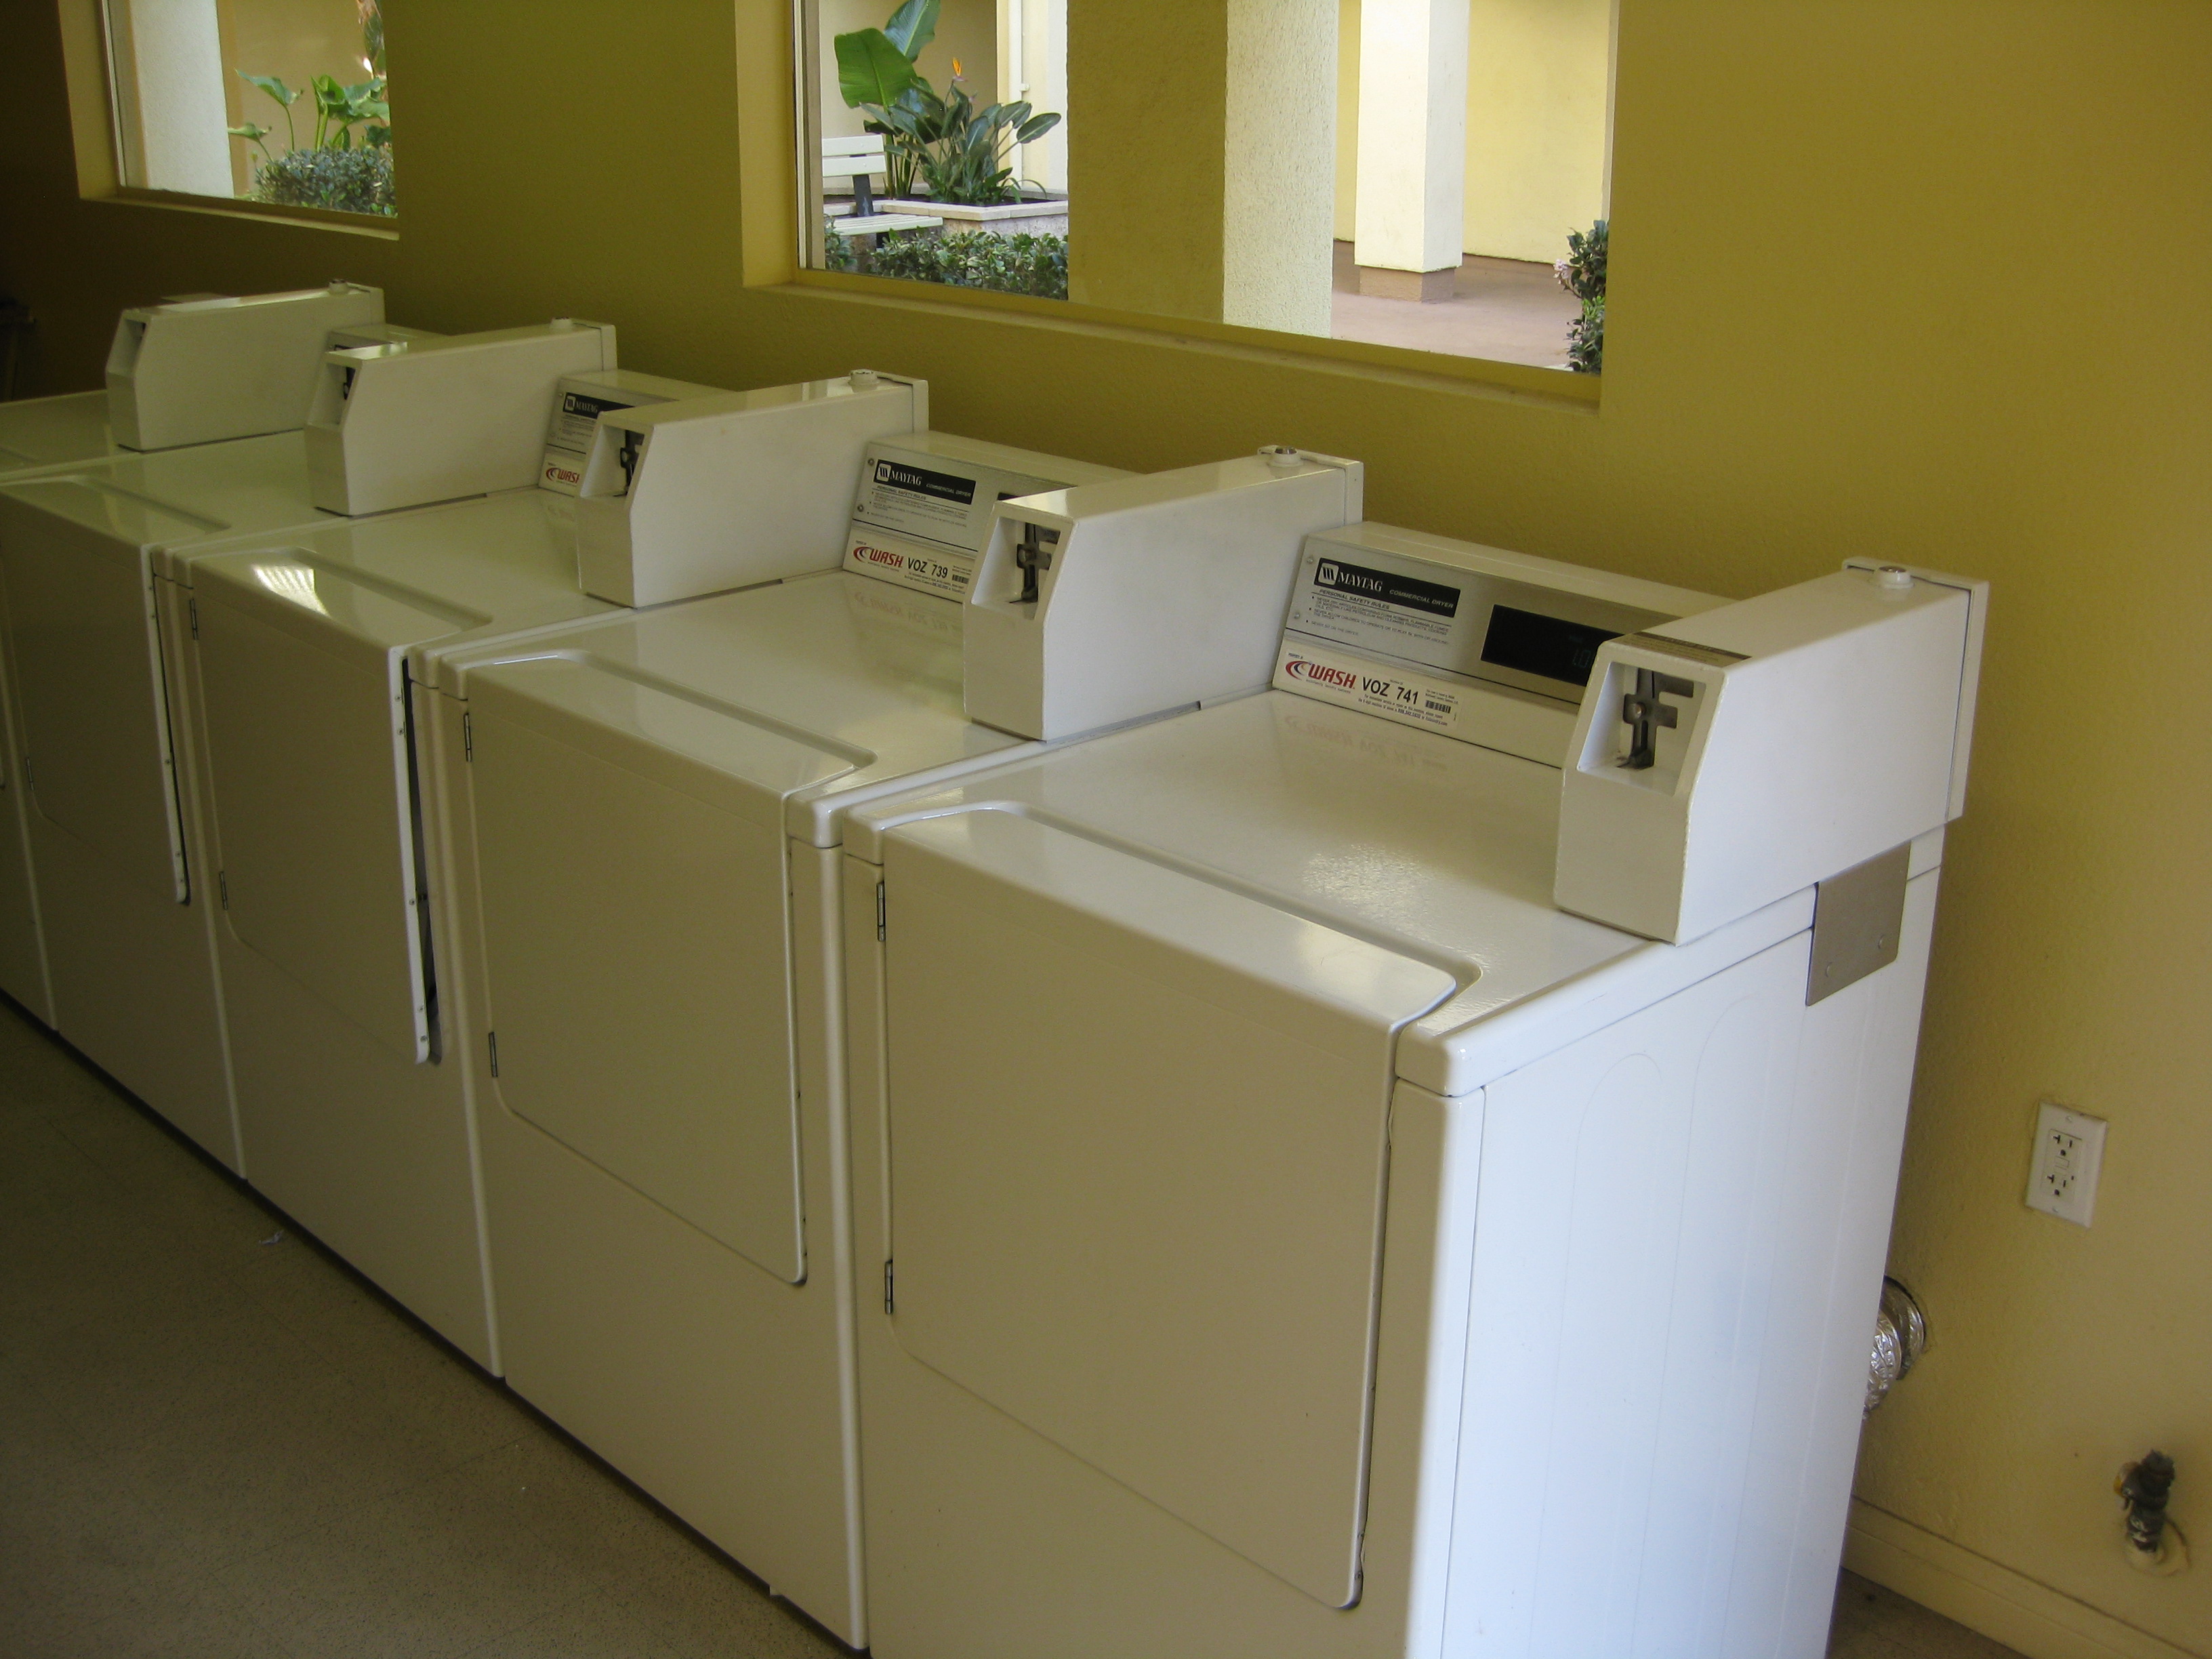 Paradise arms laundry room. four laundry machines along wall. large windows that bring in a lot of light